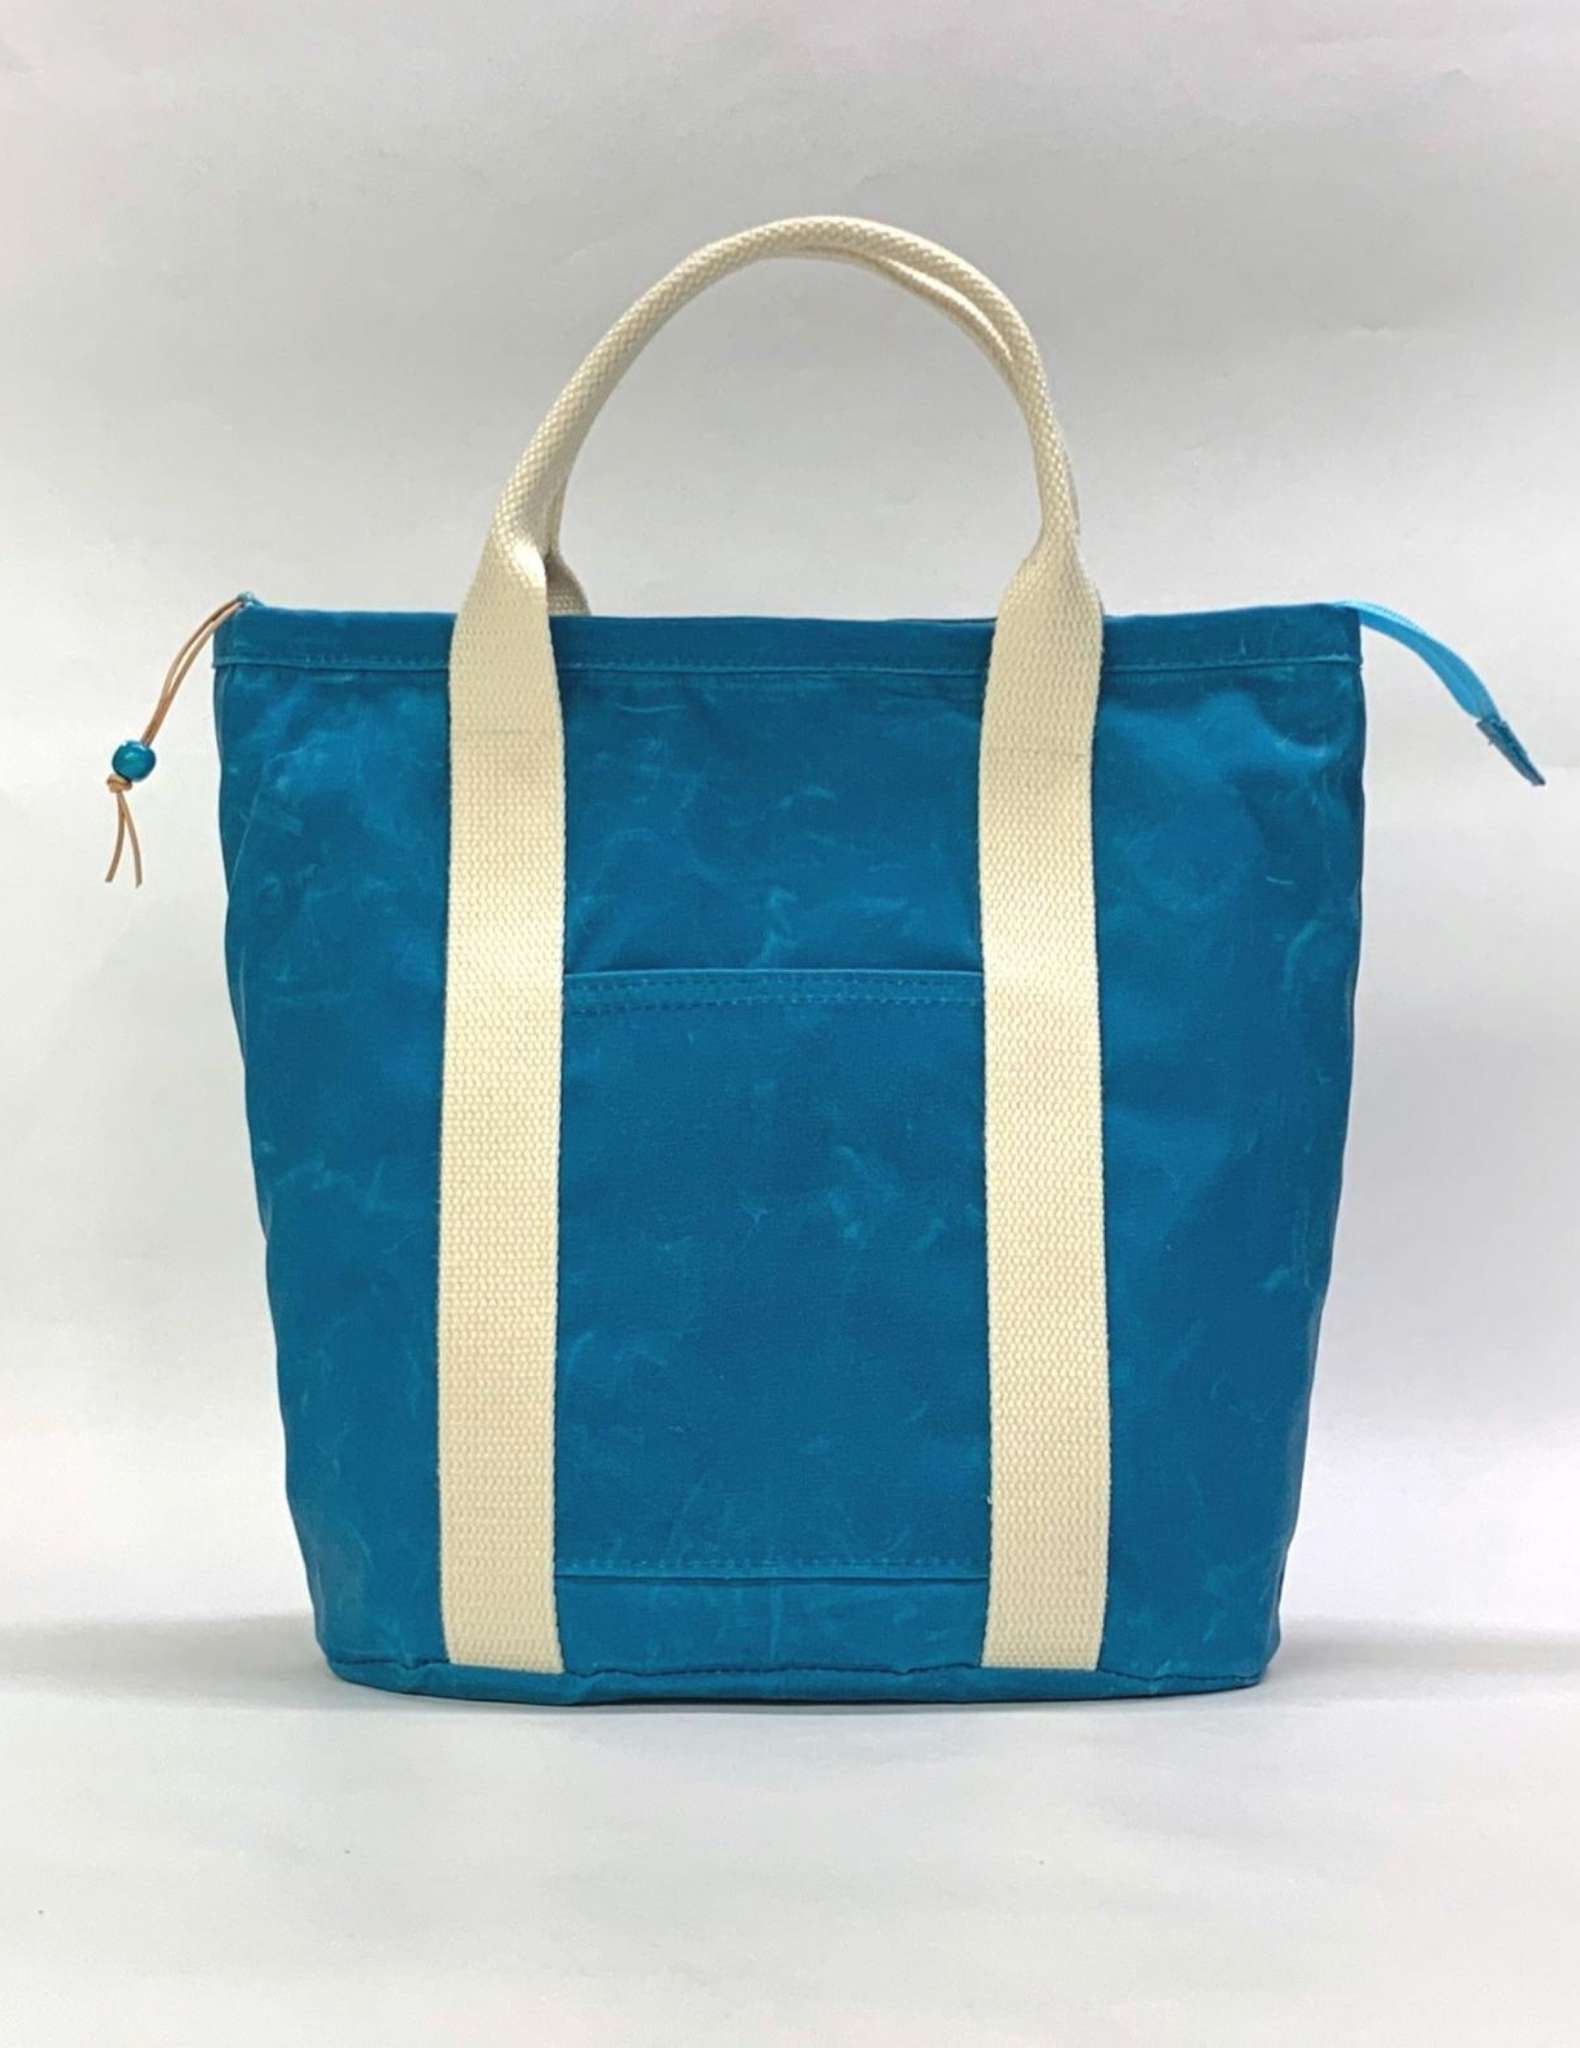 A blue and white waxed canvas knitting bag